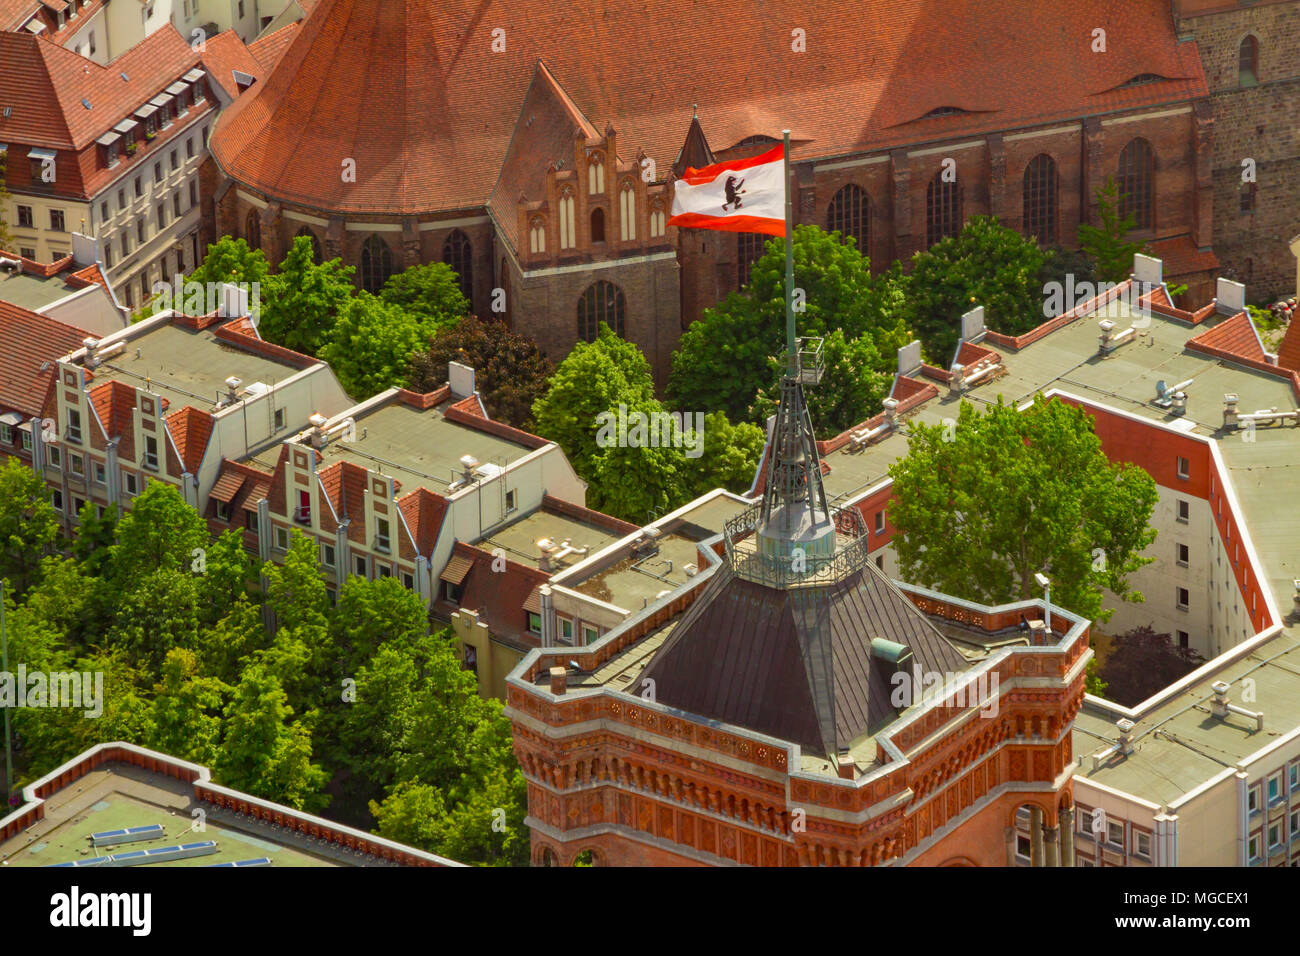 Aerial view of the flag of berlin on the top of Rotes Rathaus (Red City Hall) building. Stock Photo